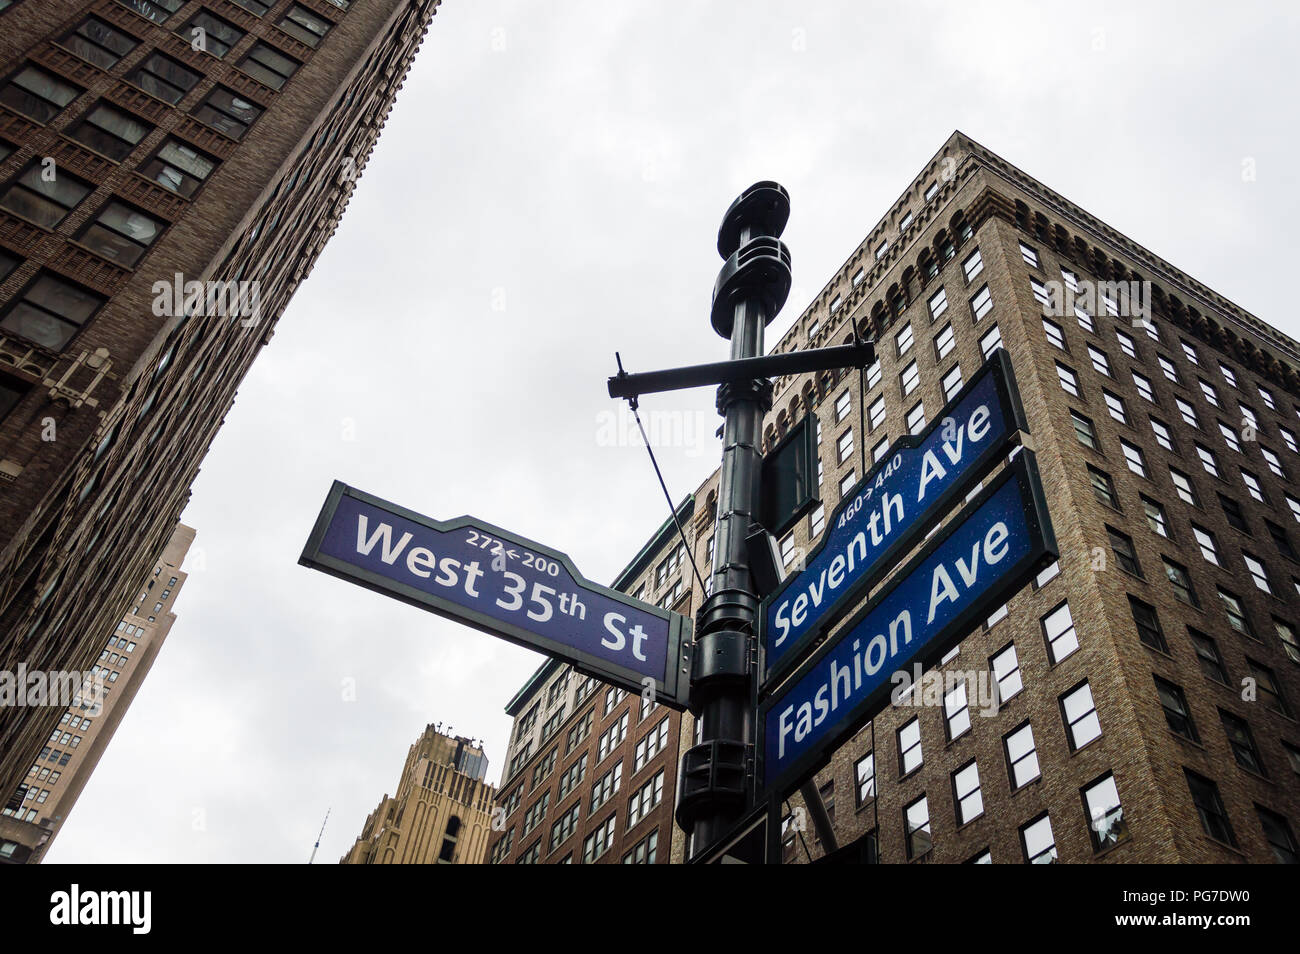 Street name signs in Midtown of New York City Stock Photo